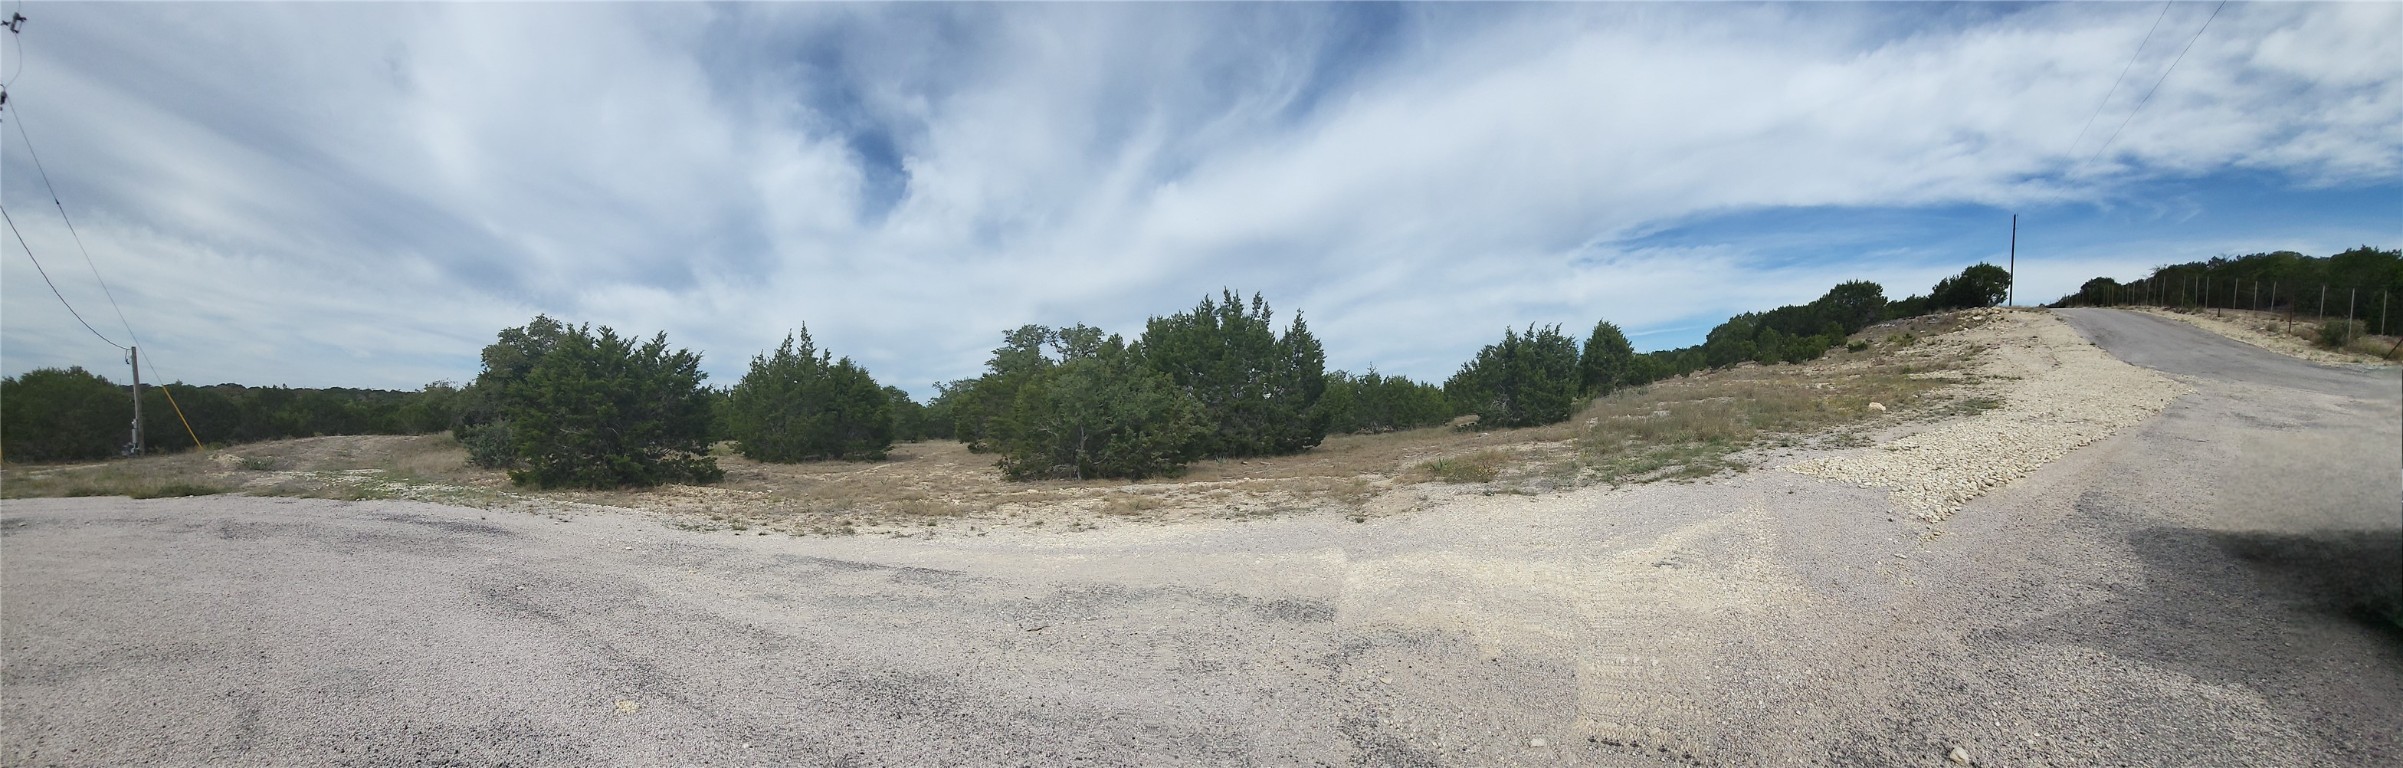 a view of a dry space with trees in the background